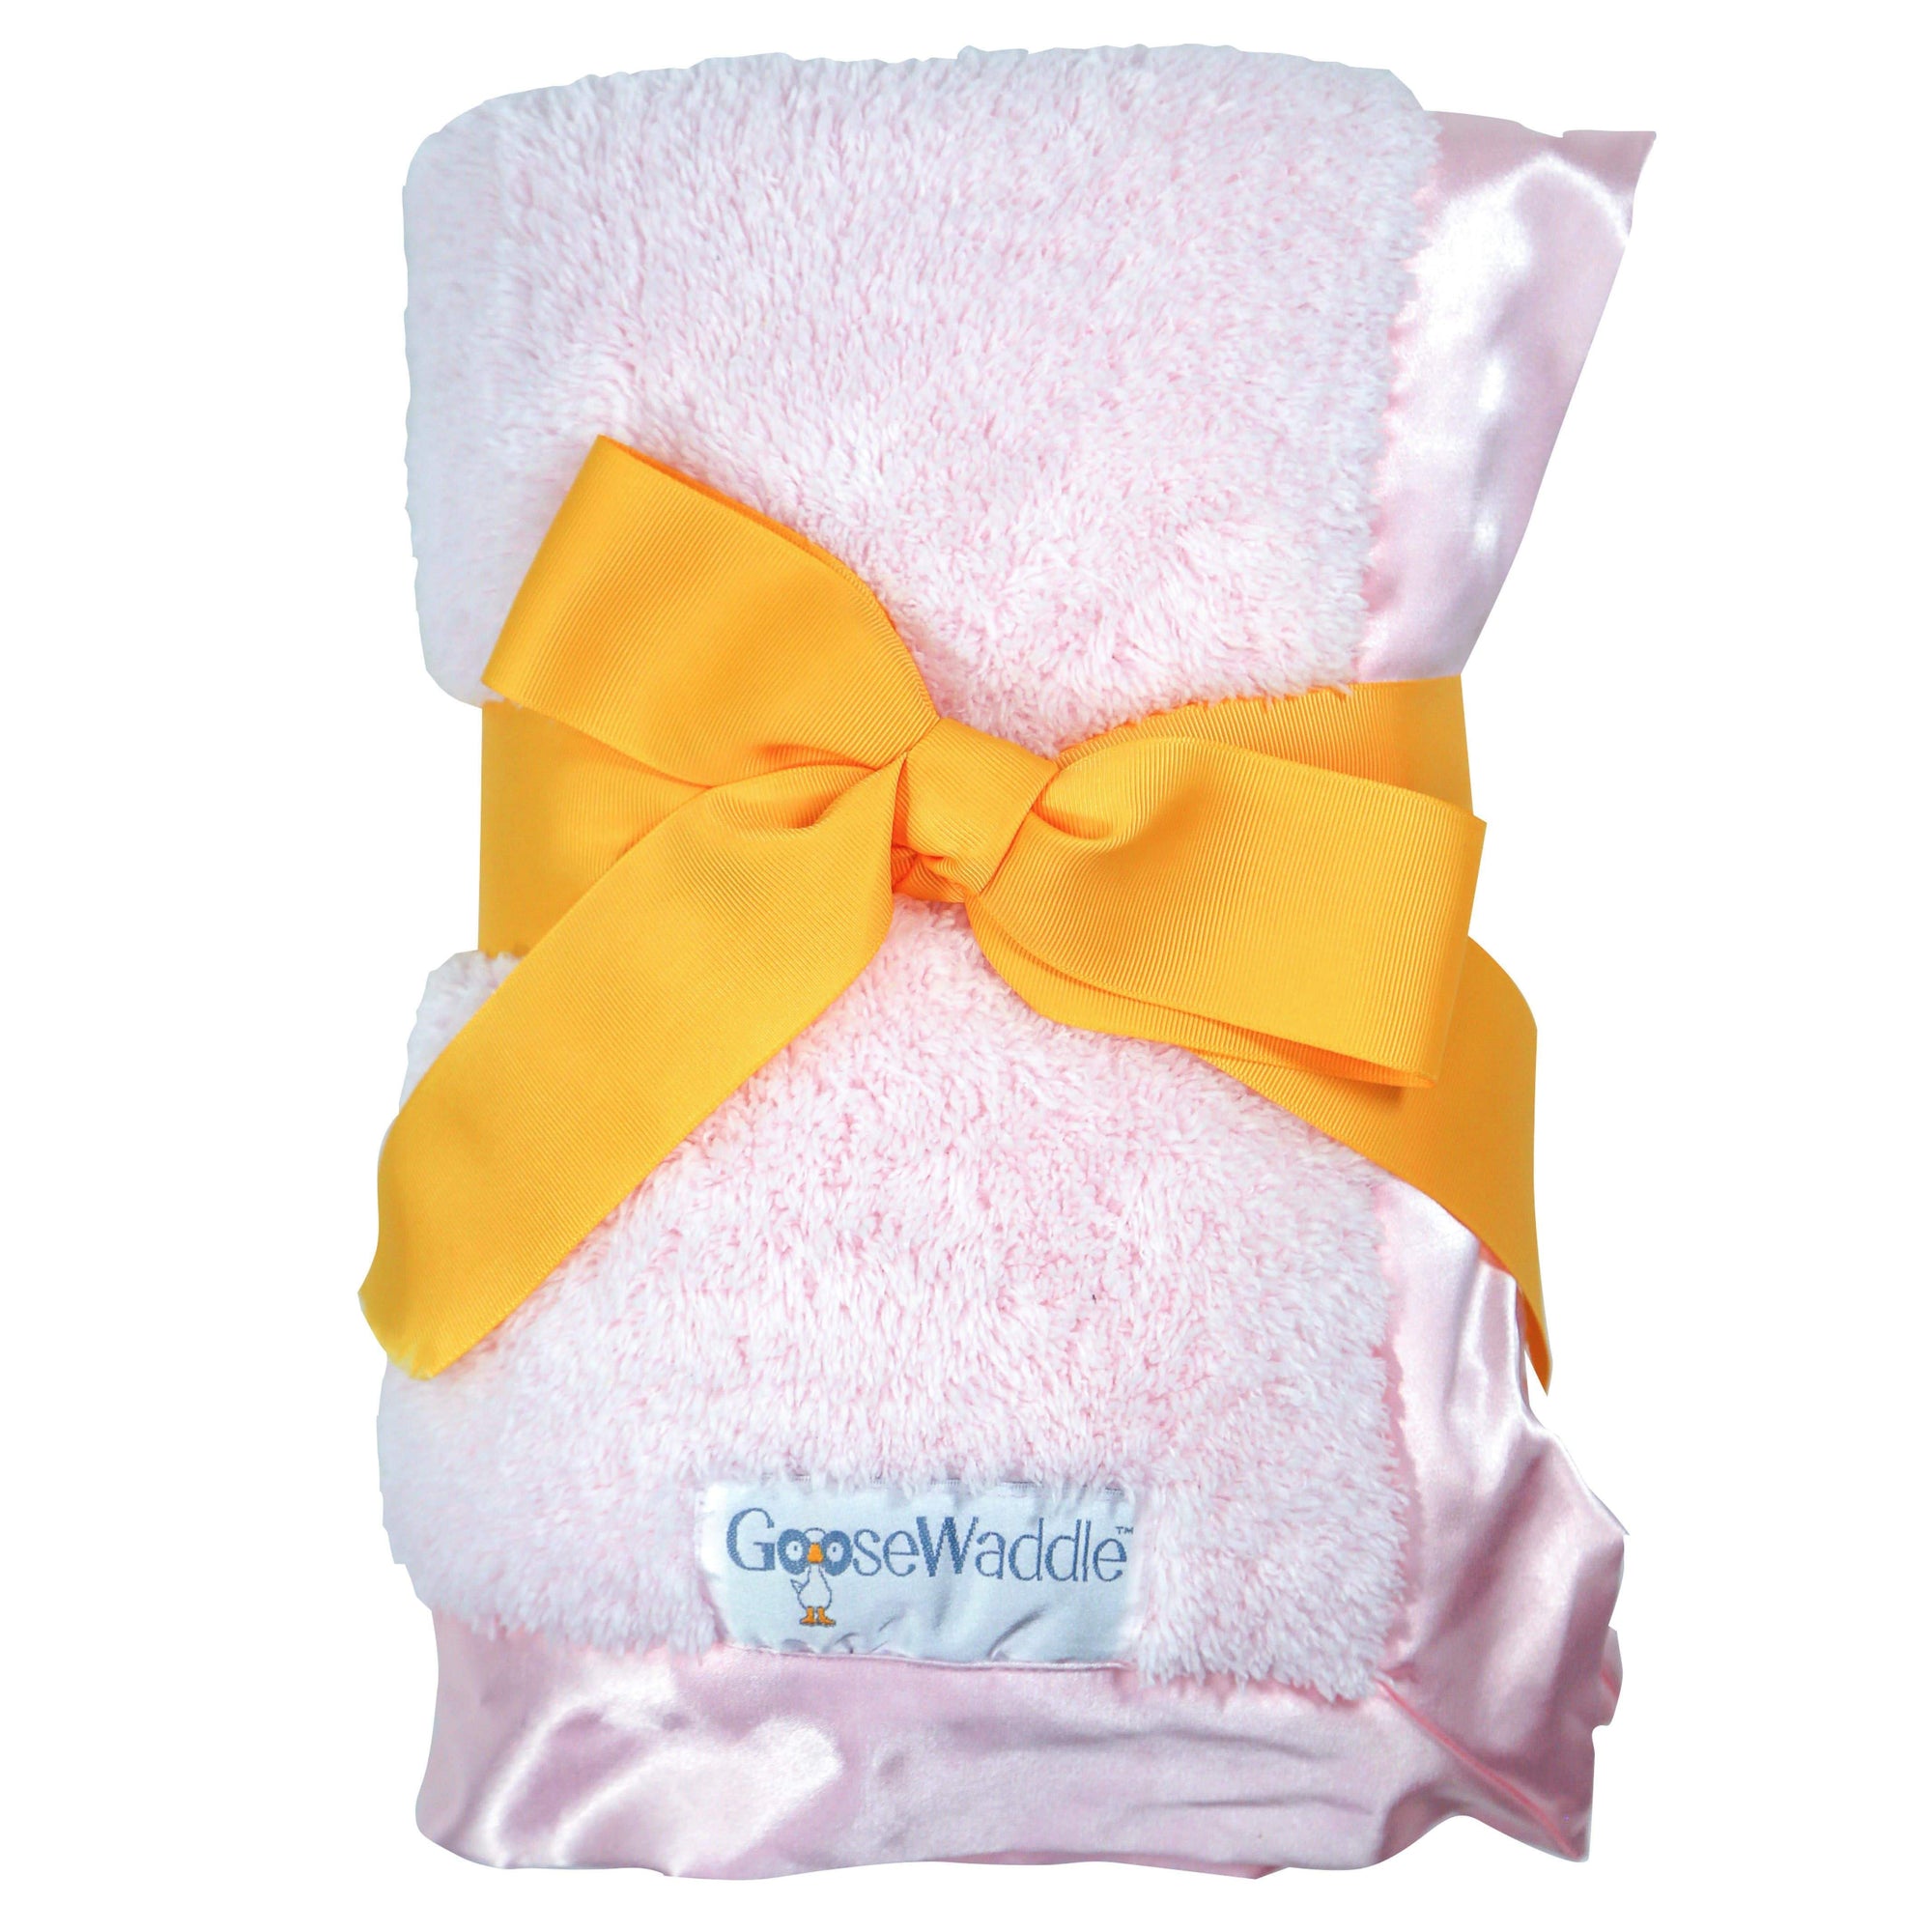 GooseWaddle Luxury Baby Blankets, Assorted Colors